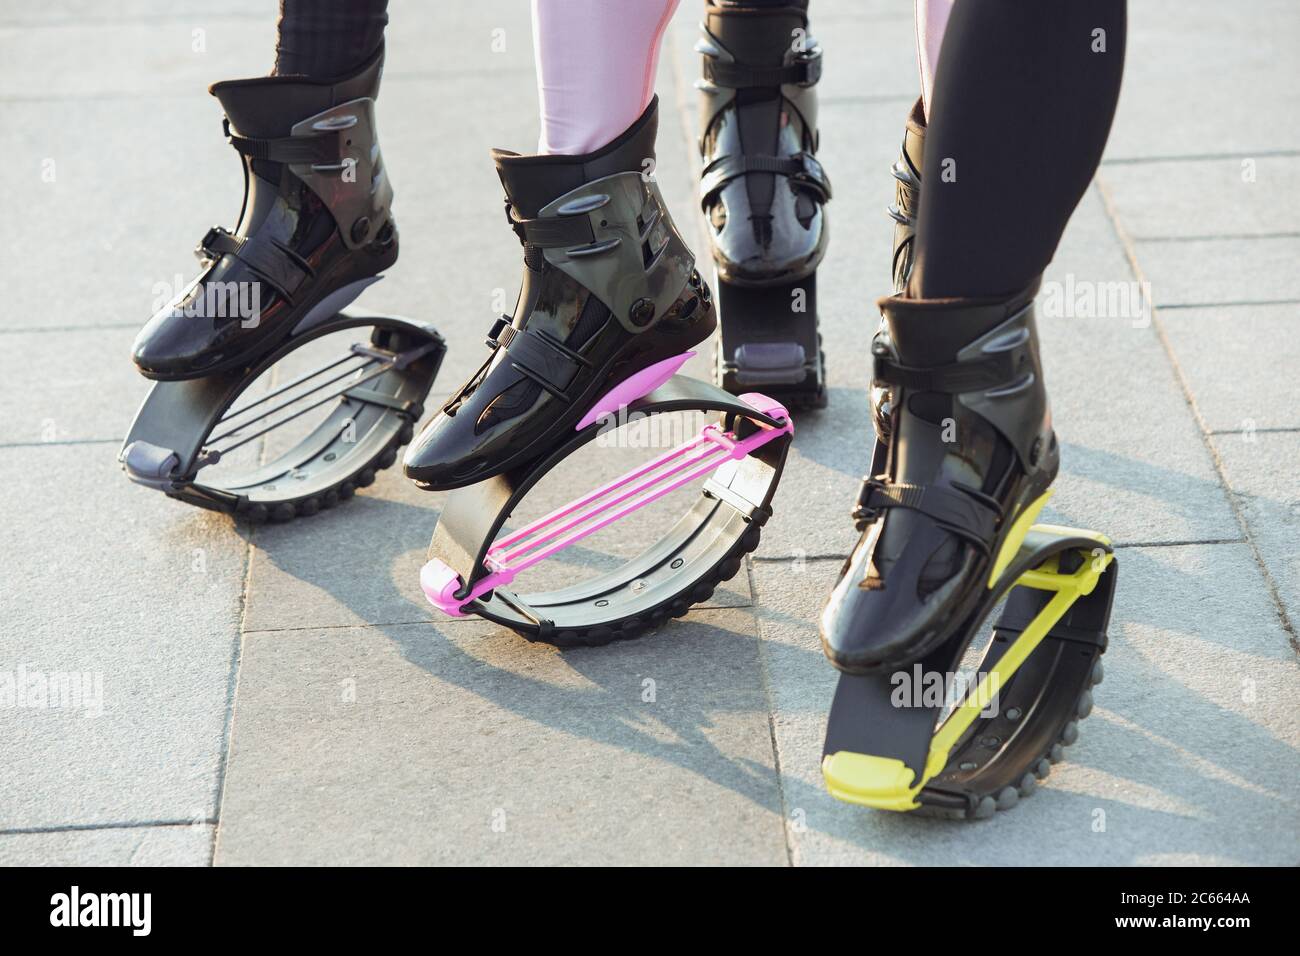 Kangoo Jumps rebound shoes-boots Instructor Training and